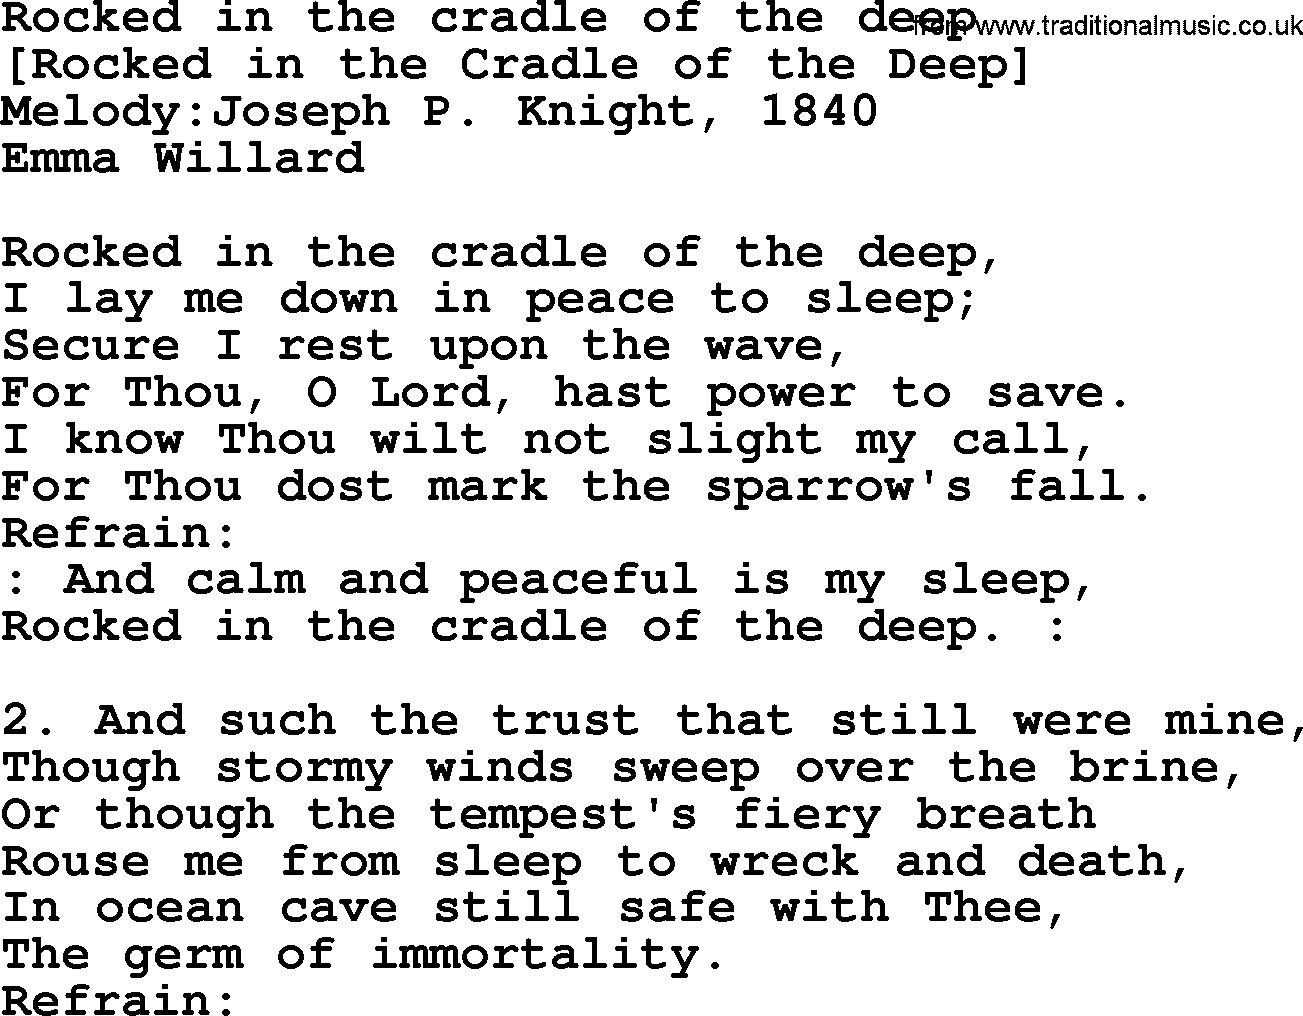 Old American Song: Rocked In The Cradle Of The Deep, lyrics